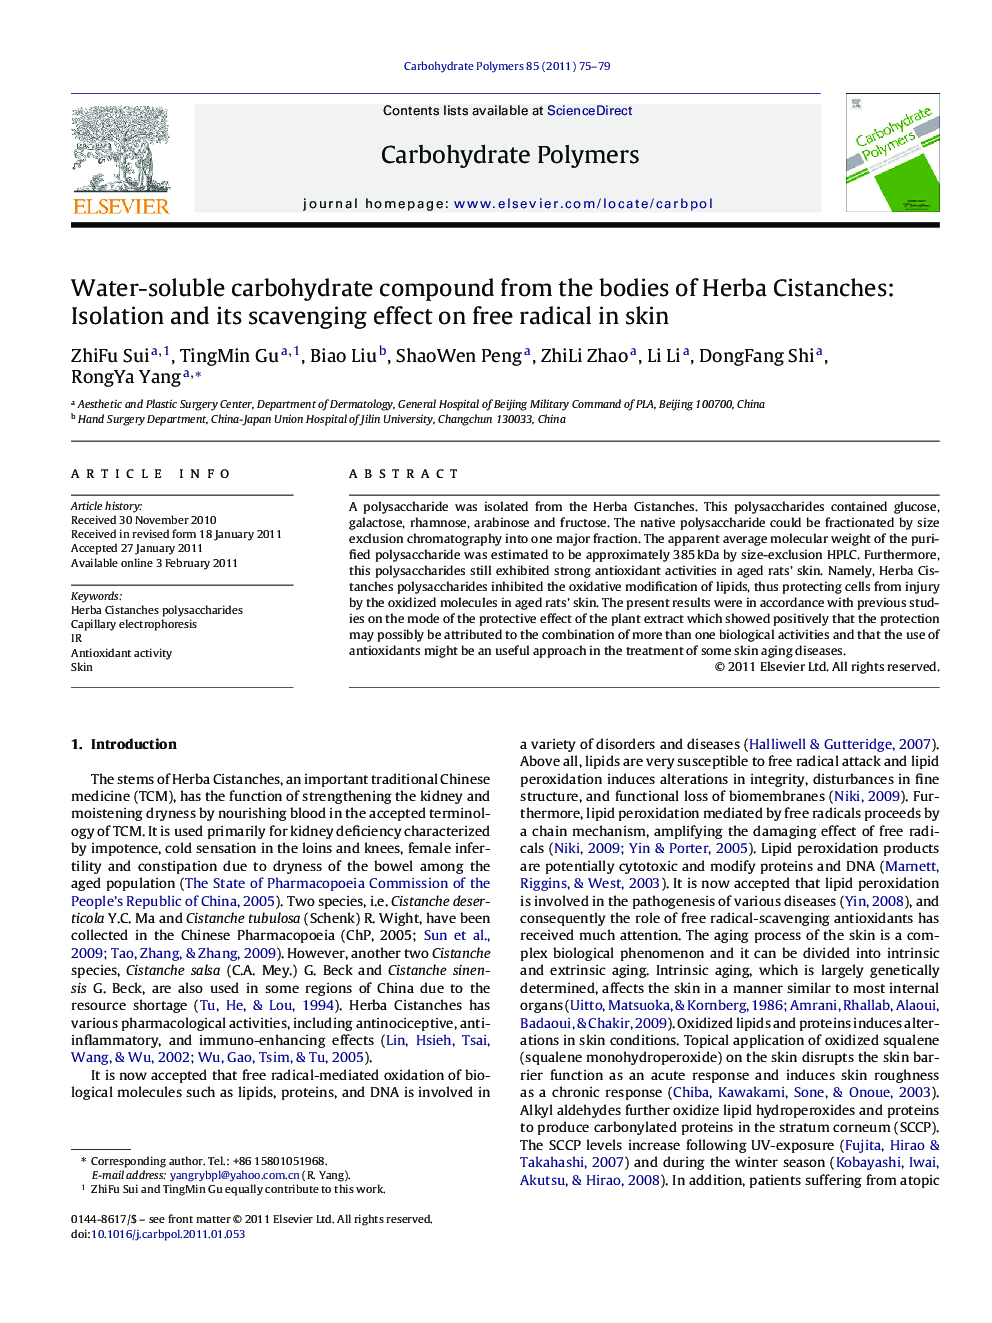 Water-soluble carbohydrate compound from the bodies of Herba Cistanches: Isolation and its scavenging effect on free radical in skin